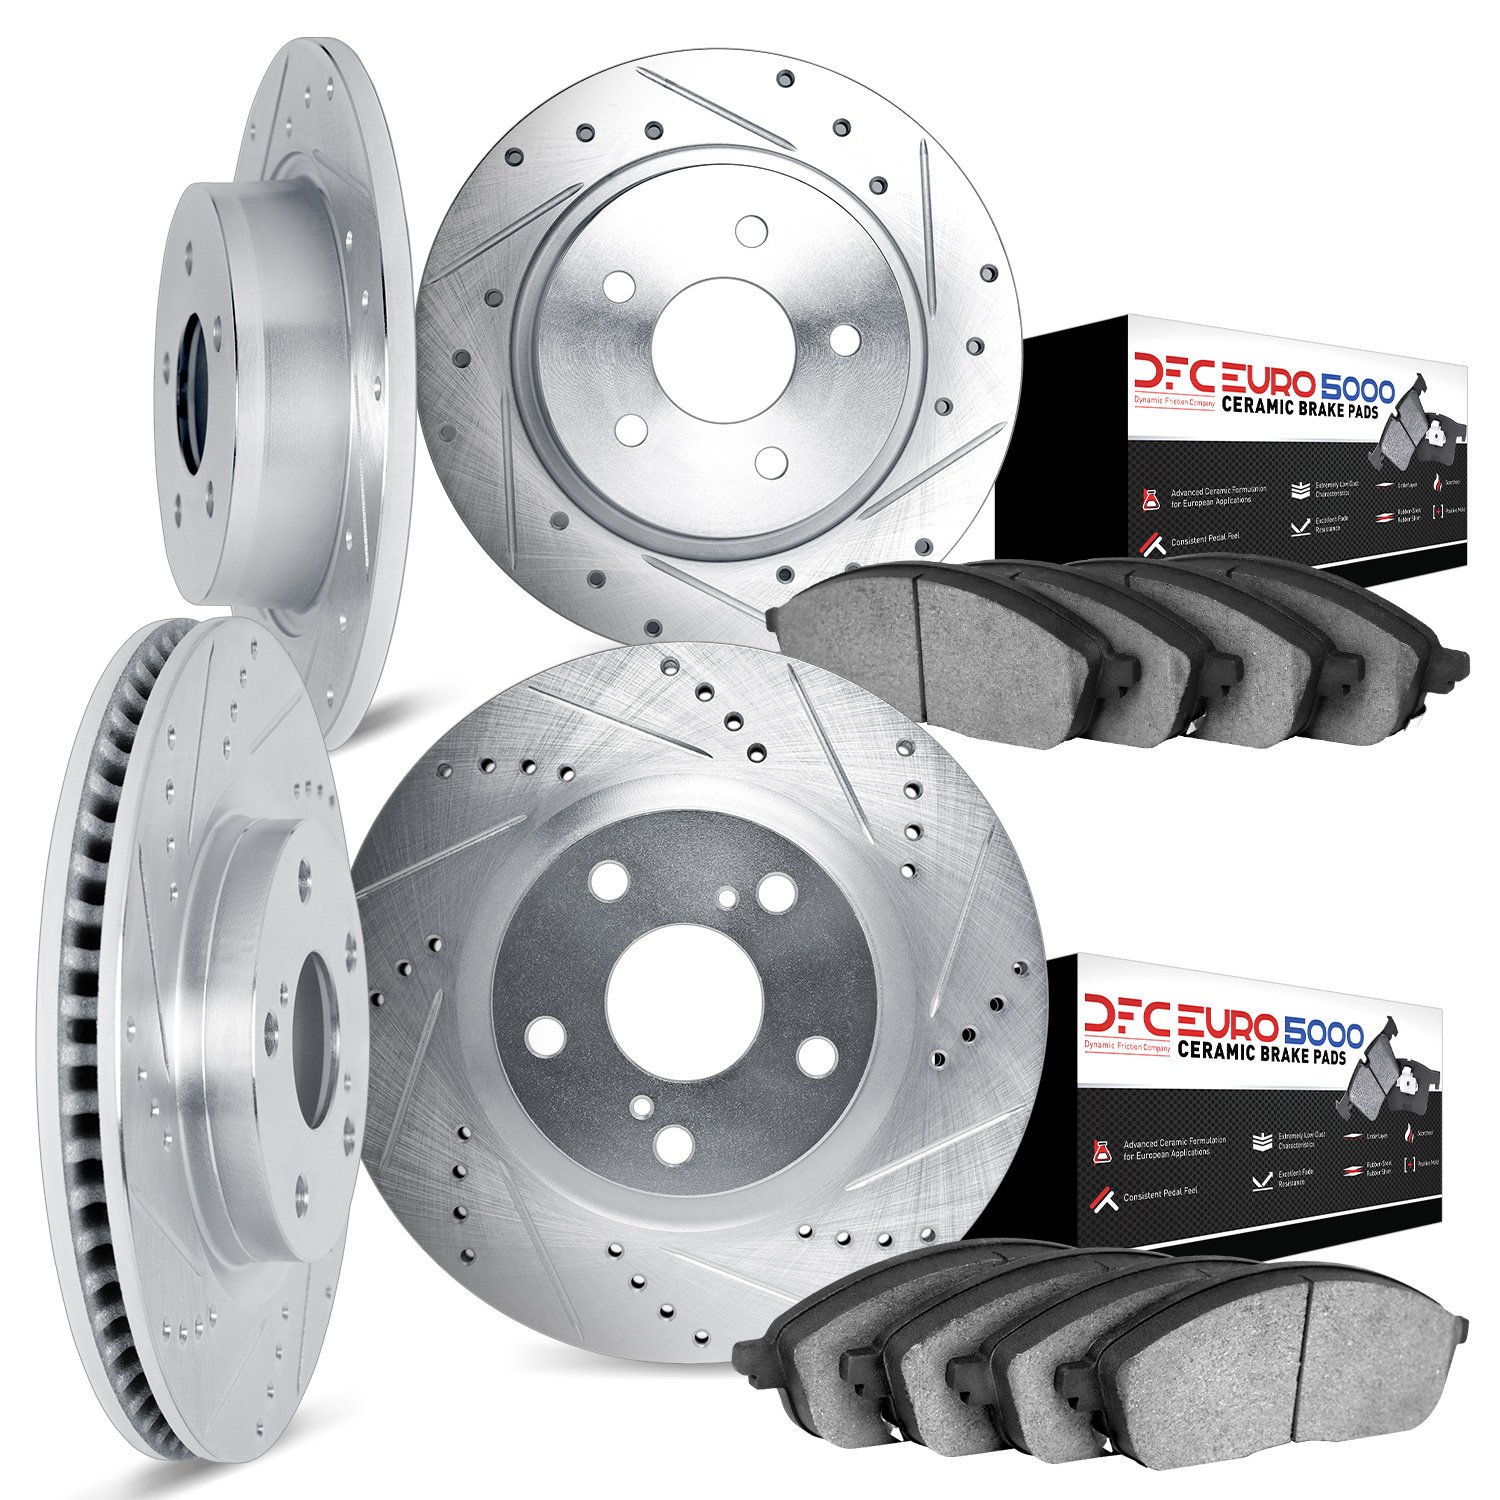 7604-63011 Drilled/Slotted Brake Rotors w/5000 Euro Ceramic Brake Pads Kit [Silver], 2001-2015 Mercedes-Benz, Position: Front an